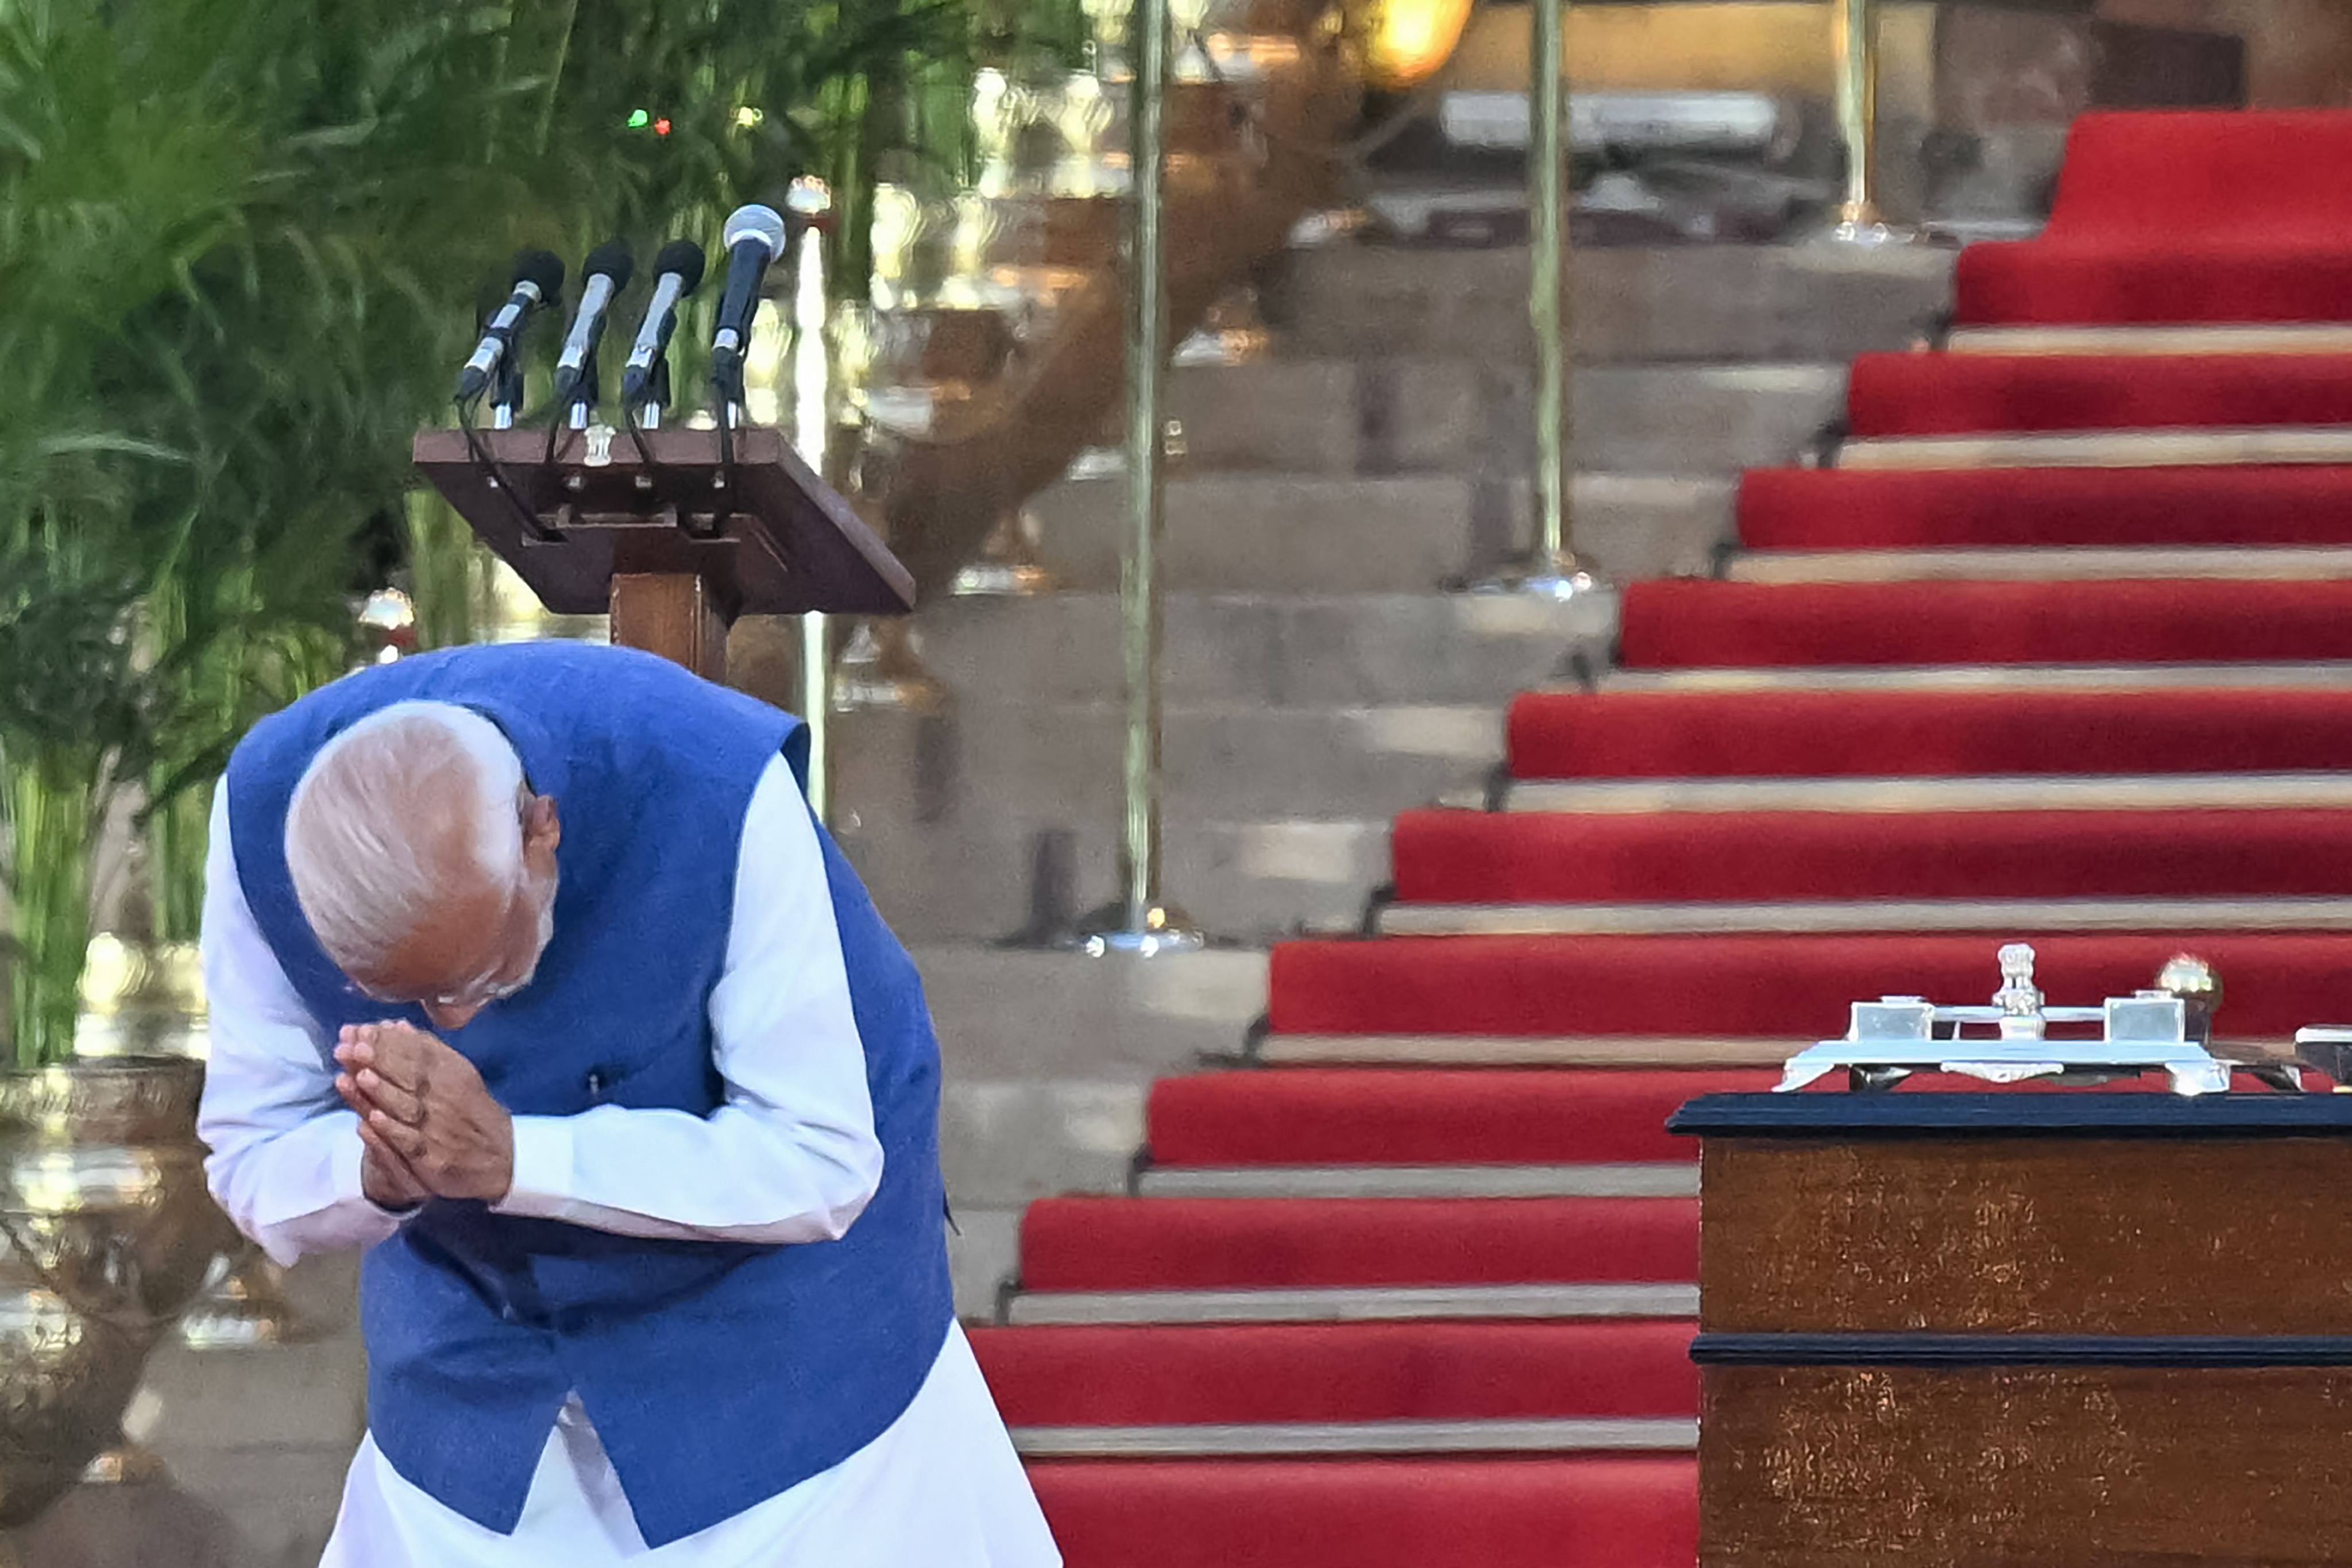 India’s Bharatiya Janata Party leader Narendra Modi bows to the gathering before taking the oath of office for a third term as the country’s prime minister at the ceremony at the presidential palace in New Delhi on June 9. Photo: AFP